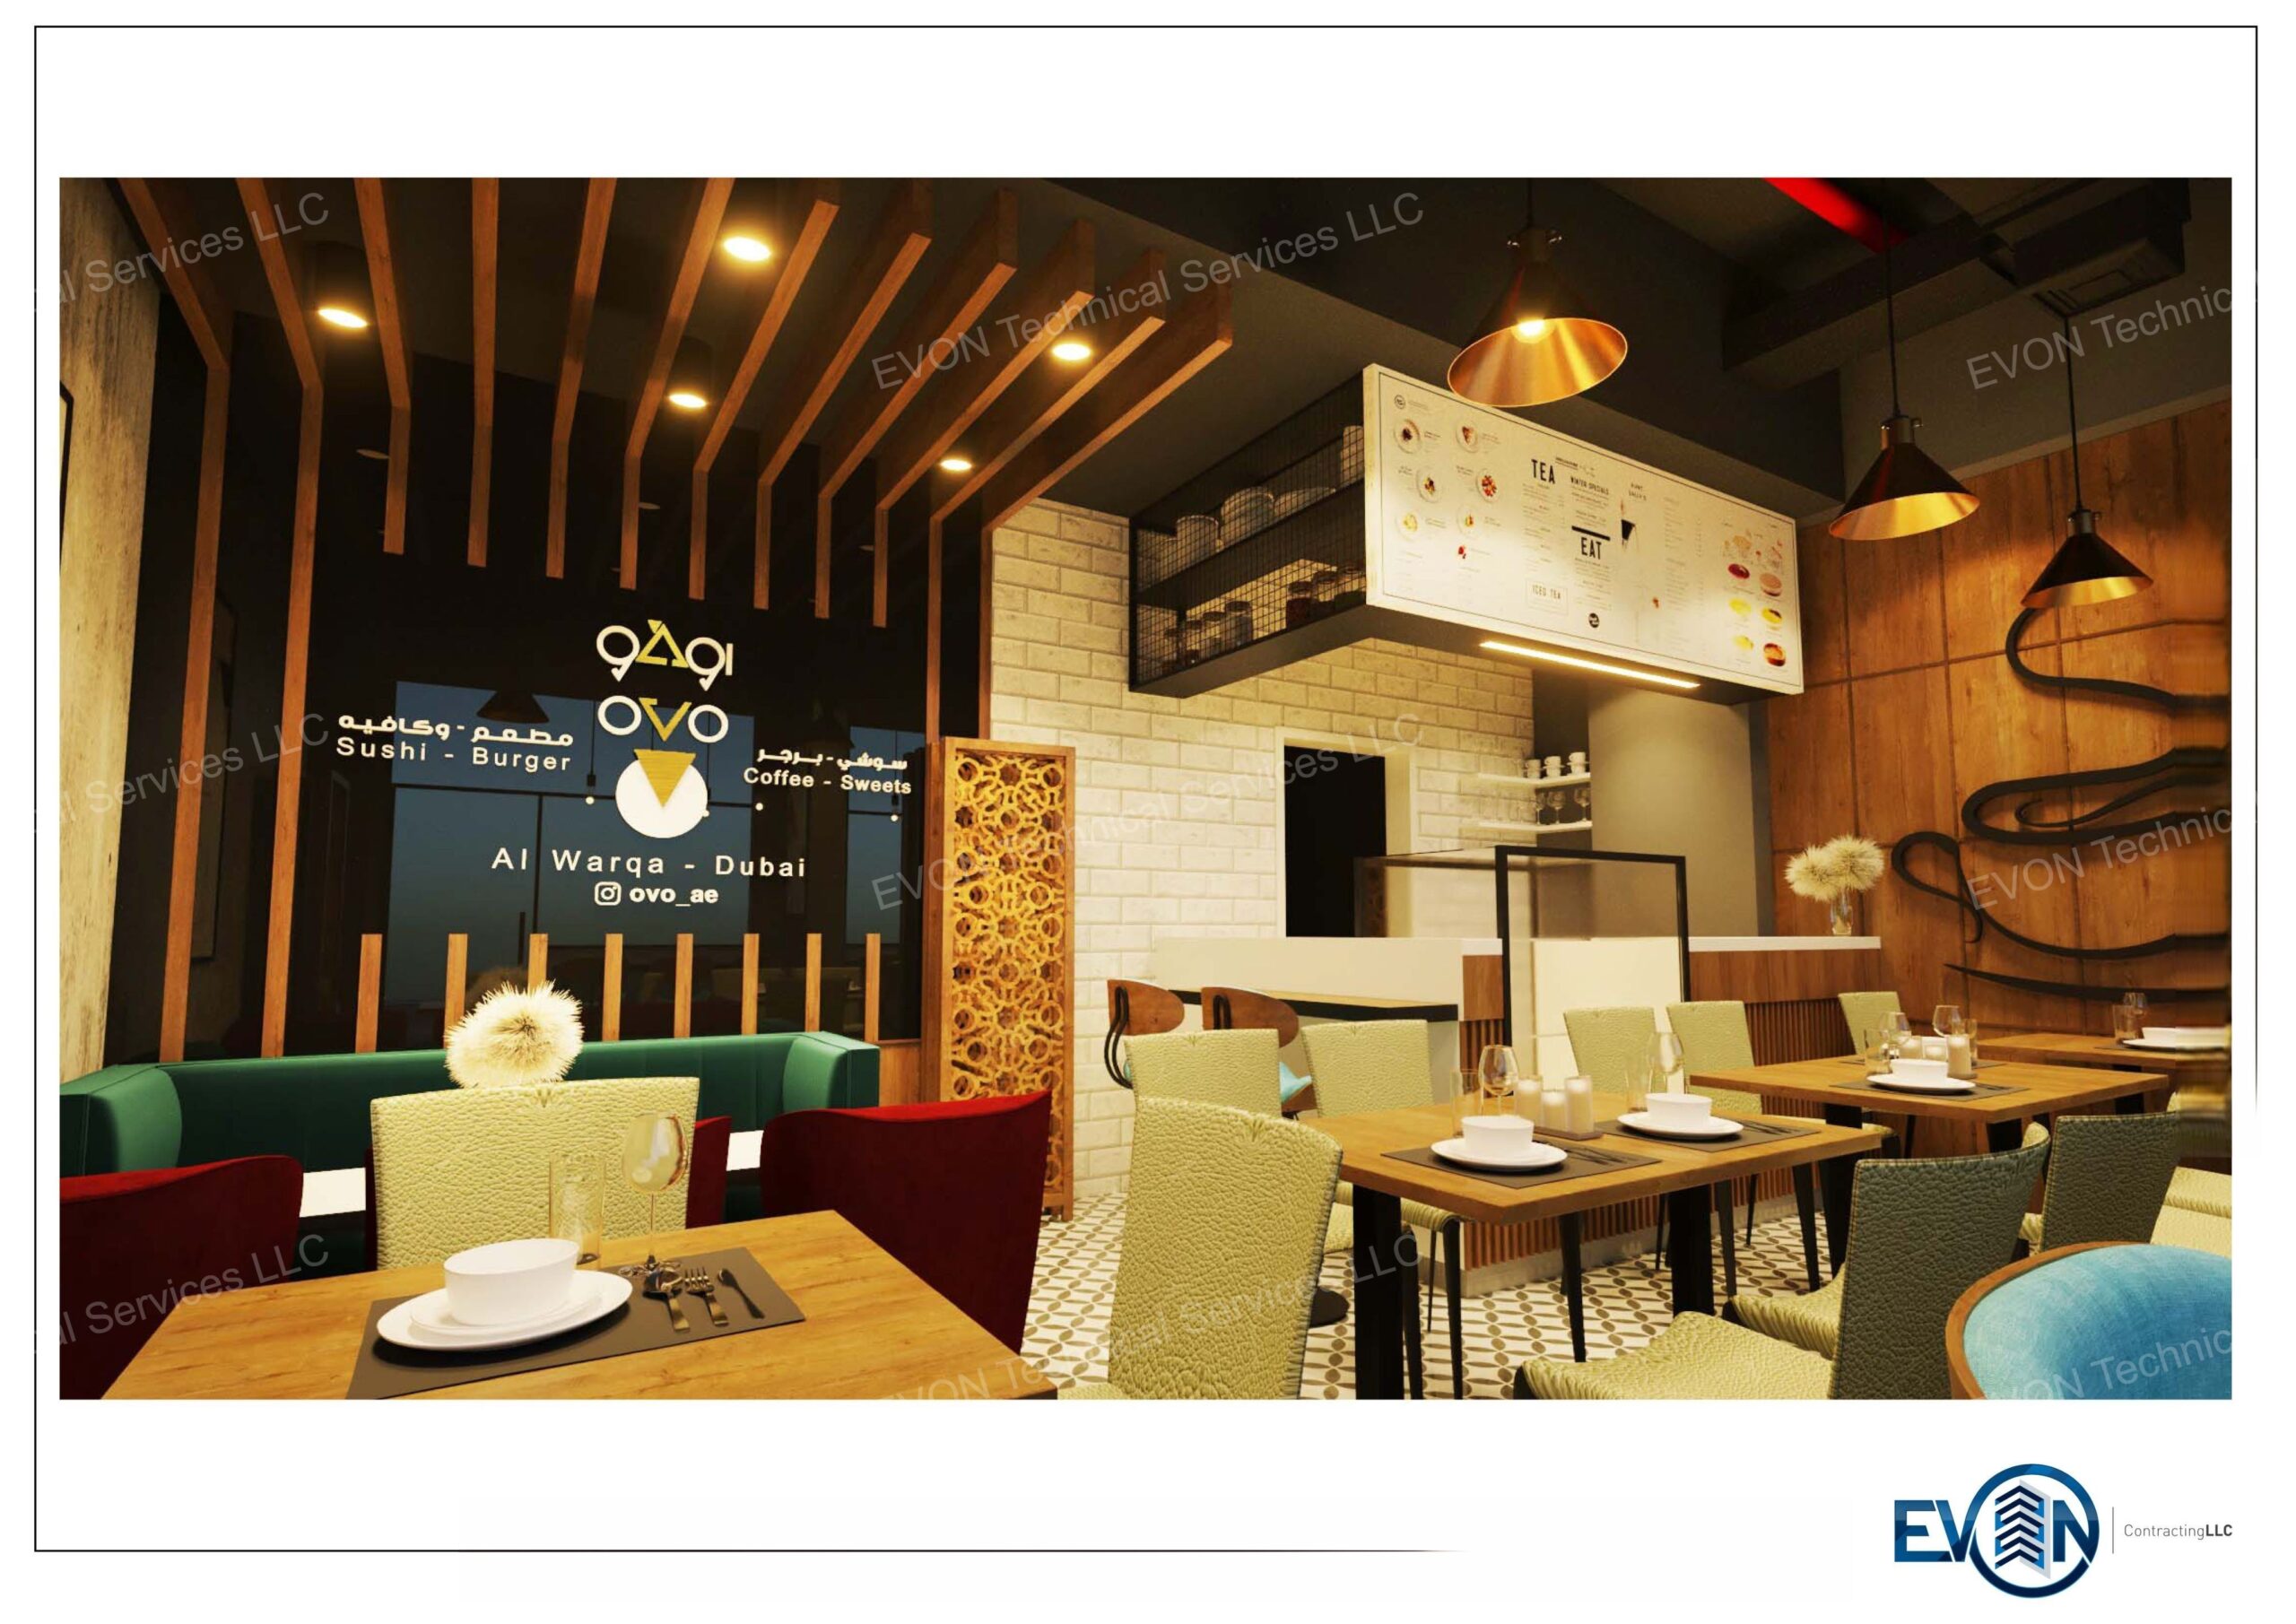 Check out our Throwback project – Restaurant Interior Design